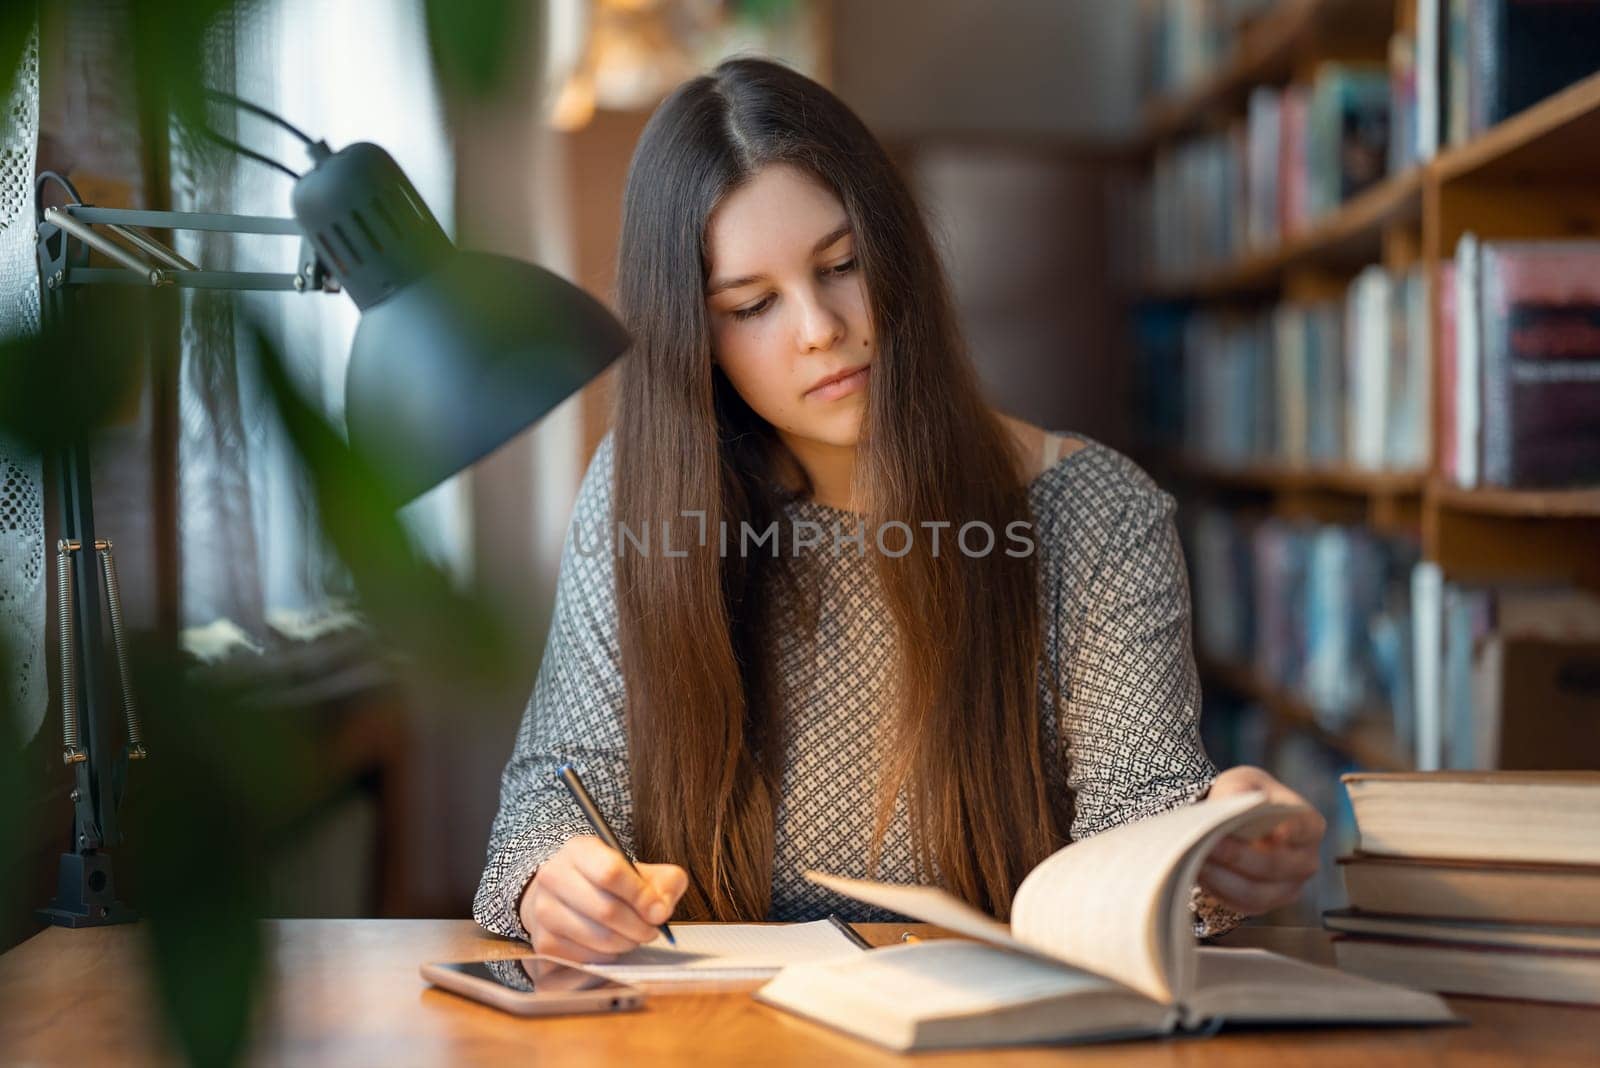 Female student working in library by VitaliiPetrushenko